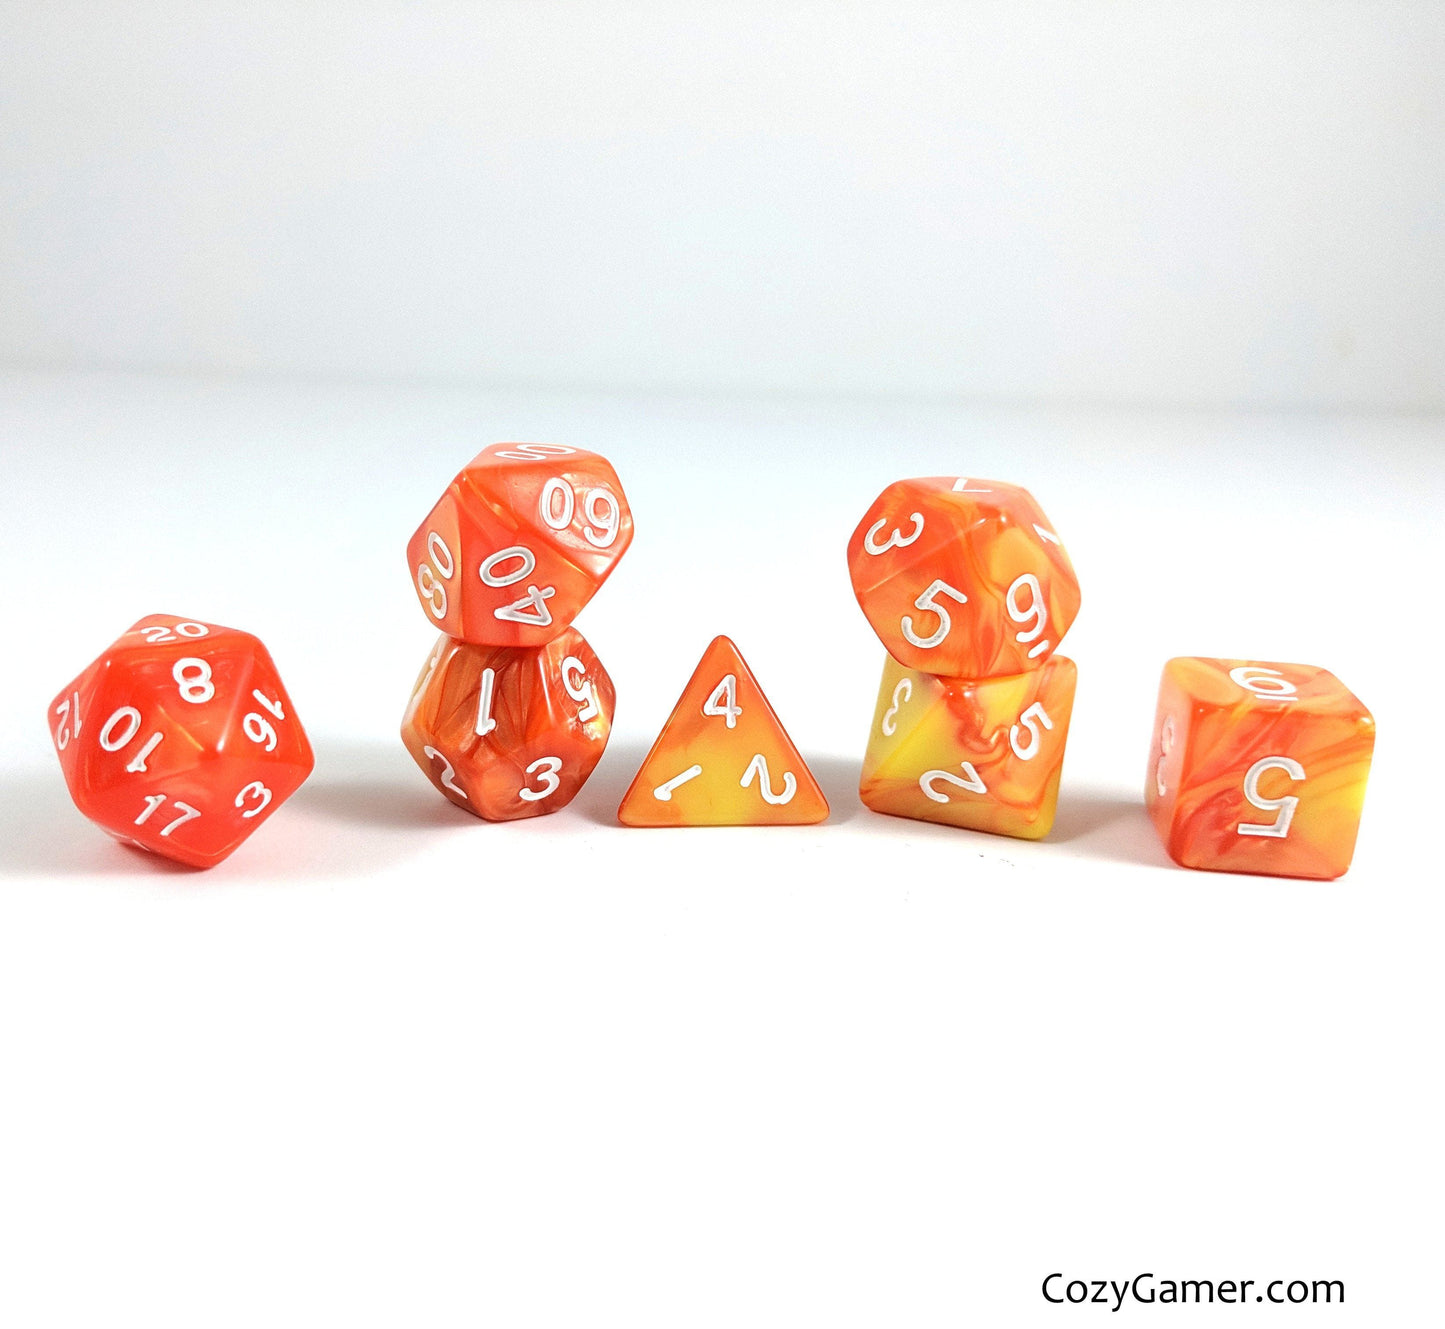 Flaming Orb Dice Set, Orange and Yellow Pearl Marbled Dice - CozyGamer